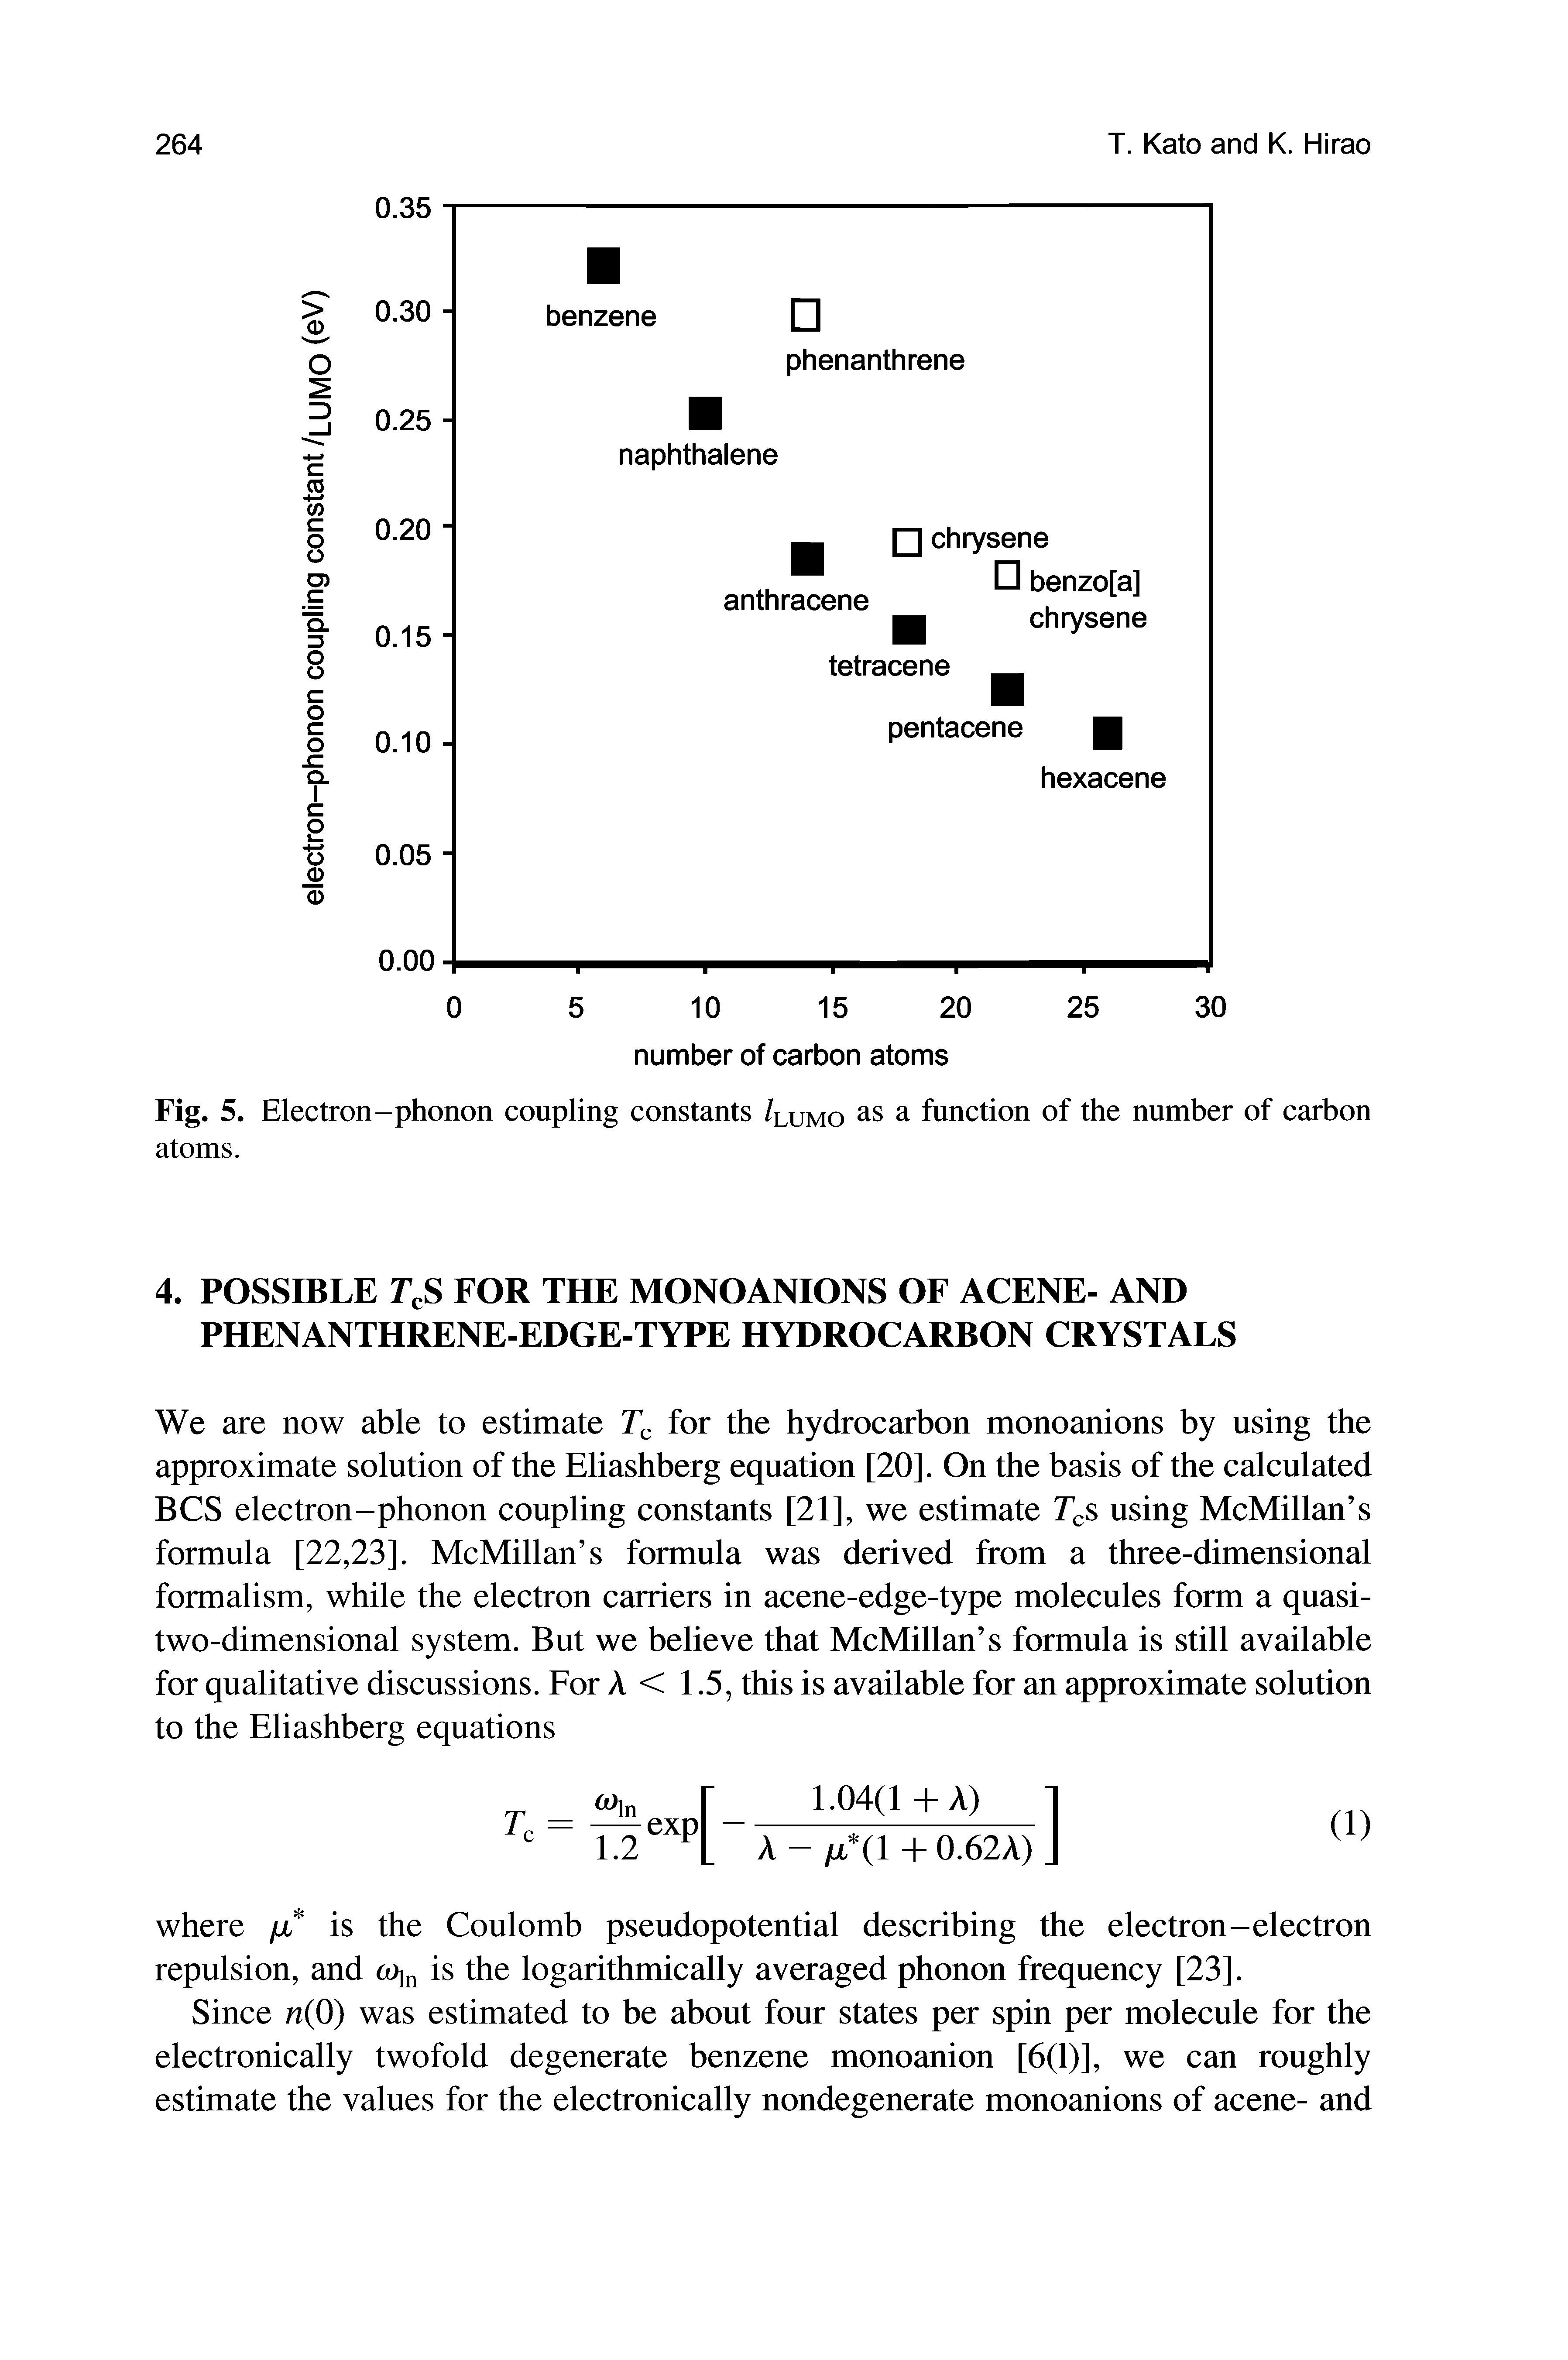 Fig. 5. Electron-phonon coupling constants /lumo as a function of the number of carbon atoms.